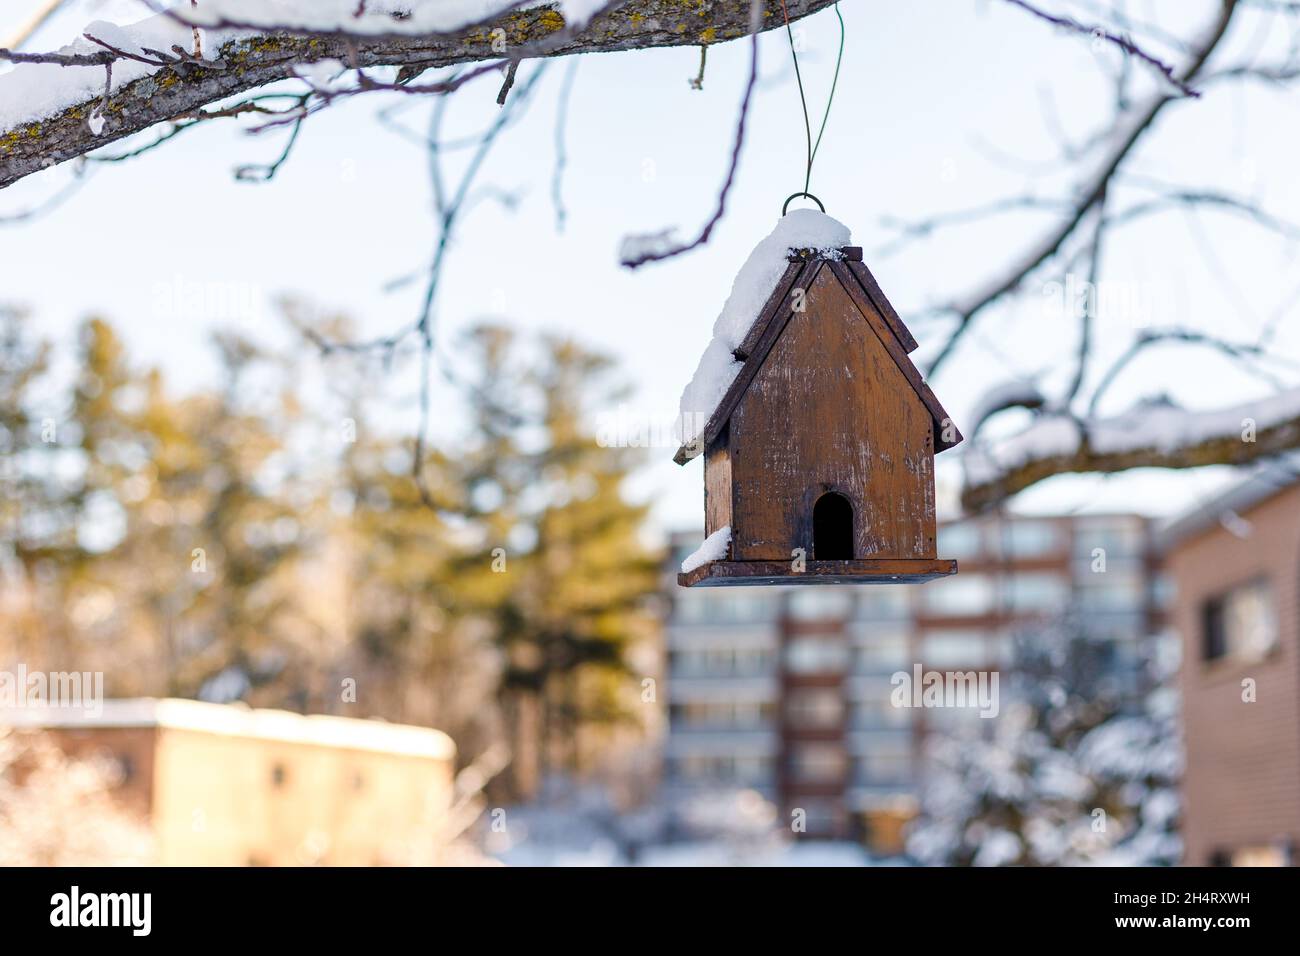 Birdhouse hanging on tree branch near houses at backyard in winter. Stock Photo